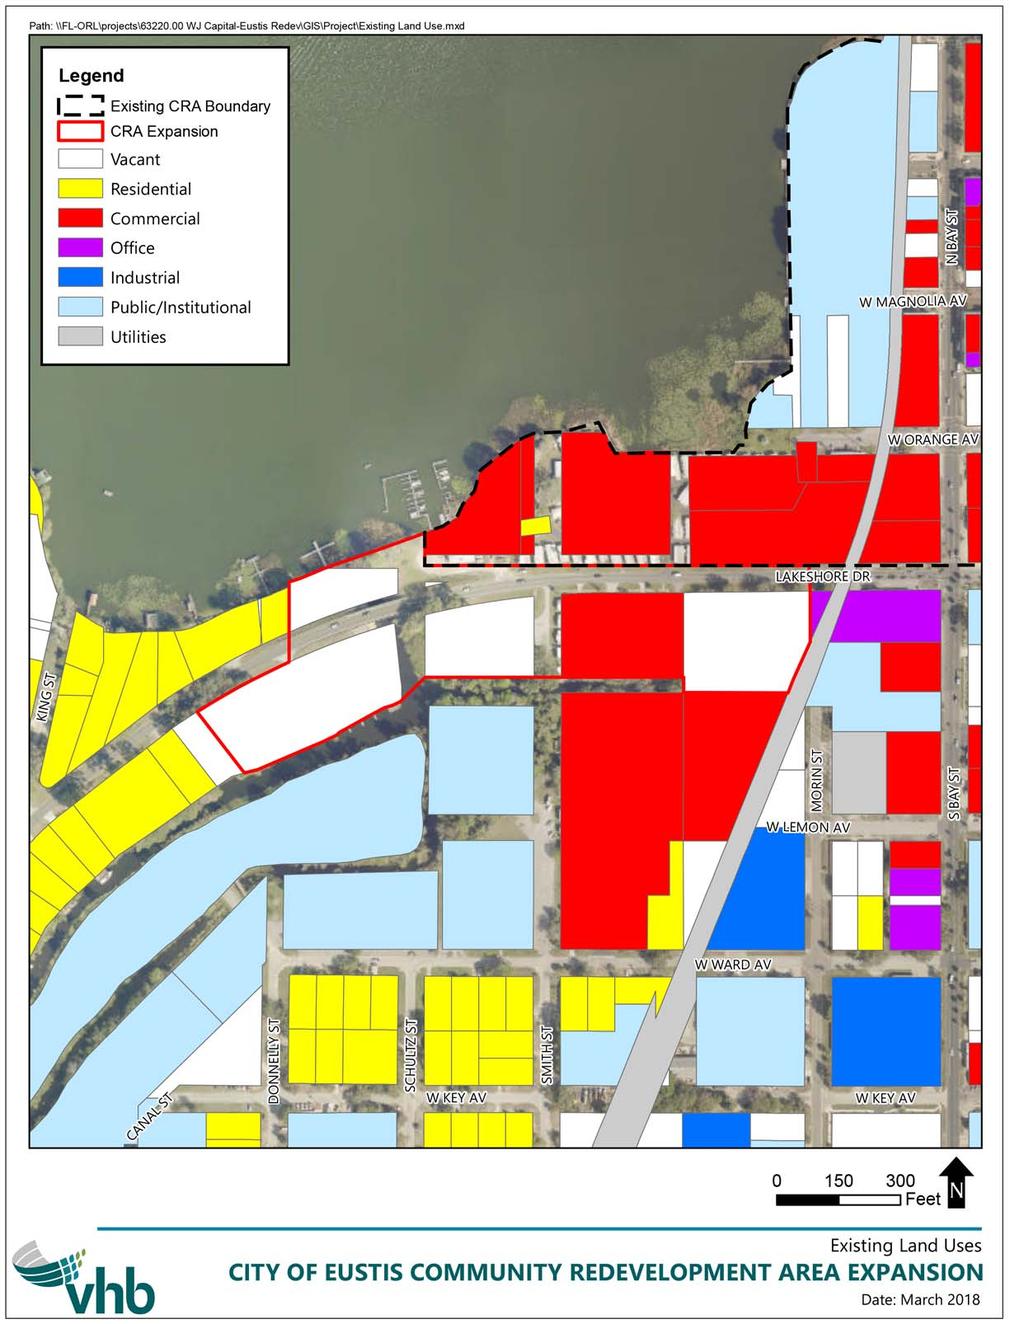 3 CITY OF EUSTIS COMMUNITY REDEVELOPMENT AREA CRA EXPANSION - EXISTING LAND USE Eustis Florida NOTE: THE INFORMATION PROVIDED ON THIS DOCUMENT SHOULD BE TREATED AS CONCEPTUAL ONLY AND MAY BE SUBJECT